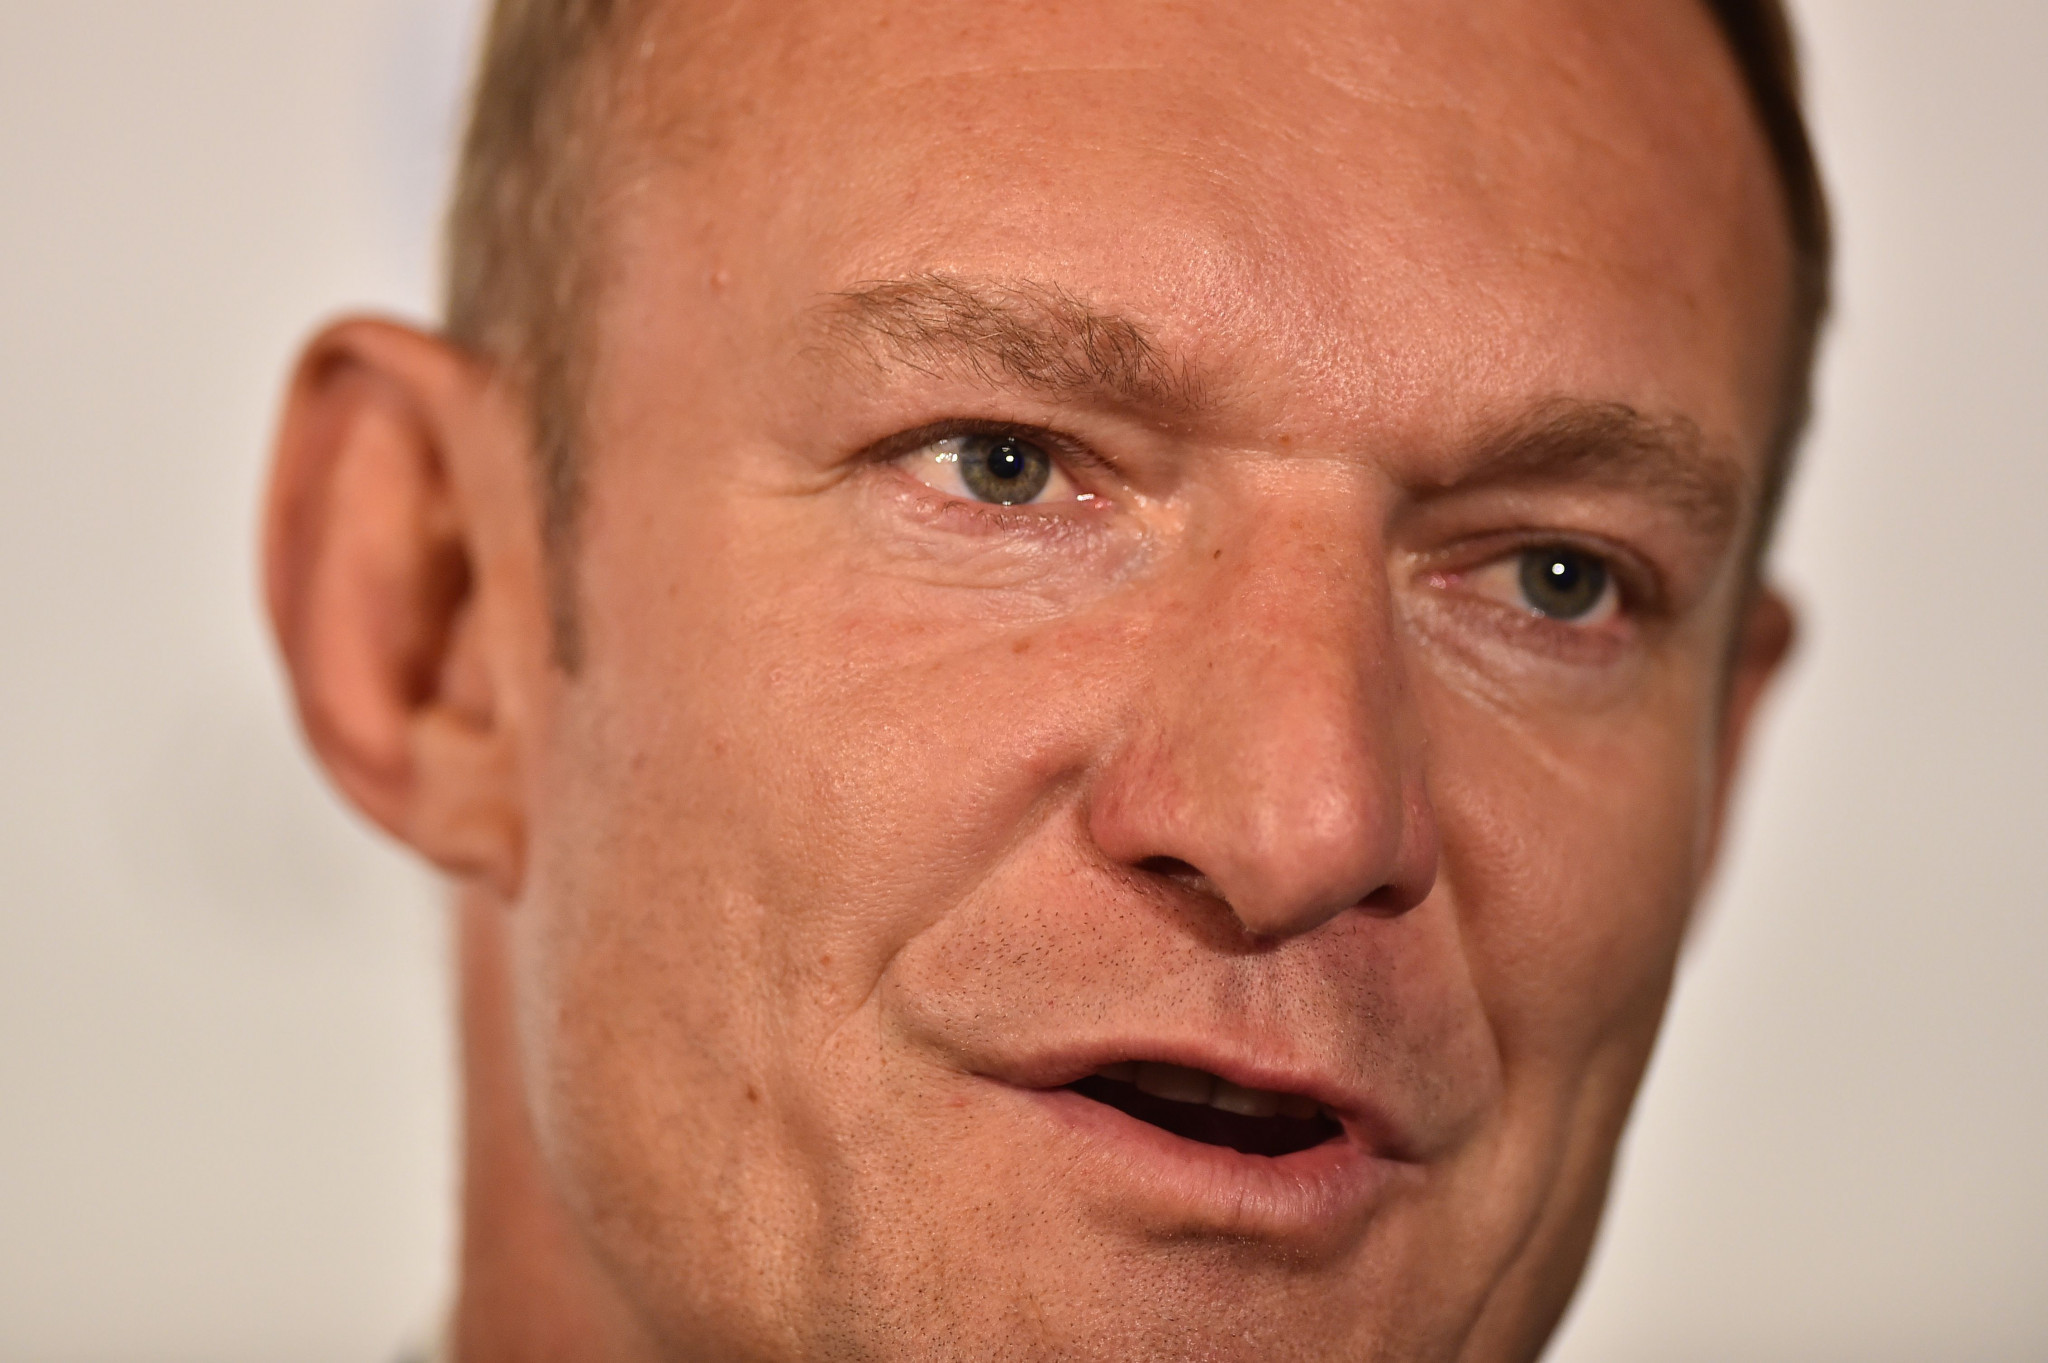 Francois Pienaar has said sport could return if the situation improves ©Getty Images